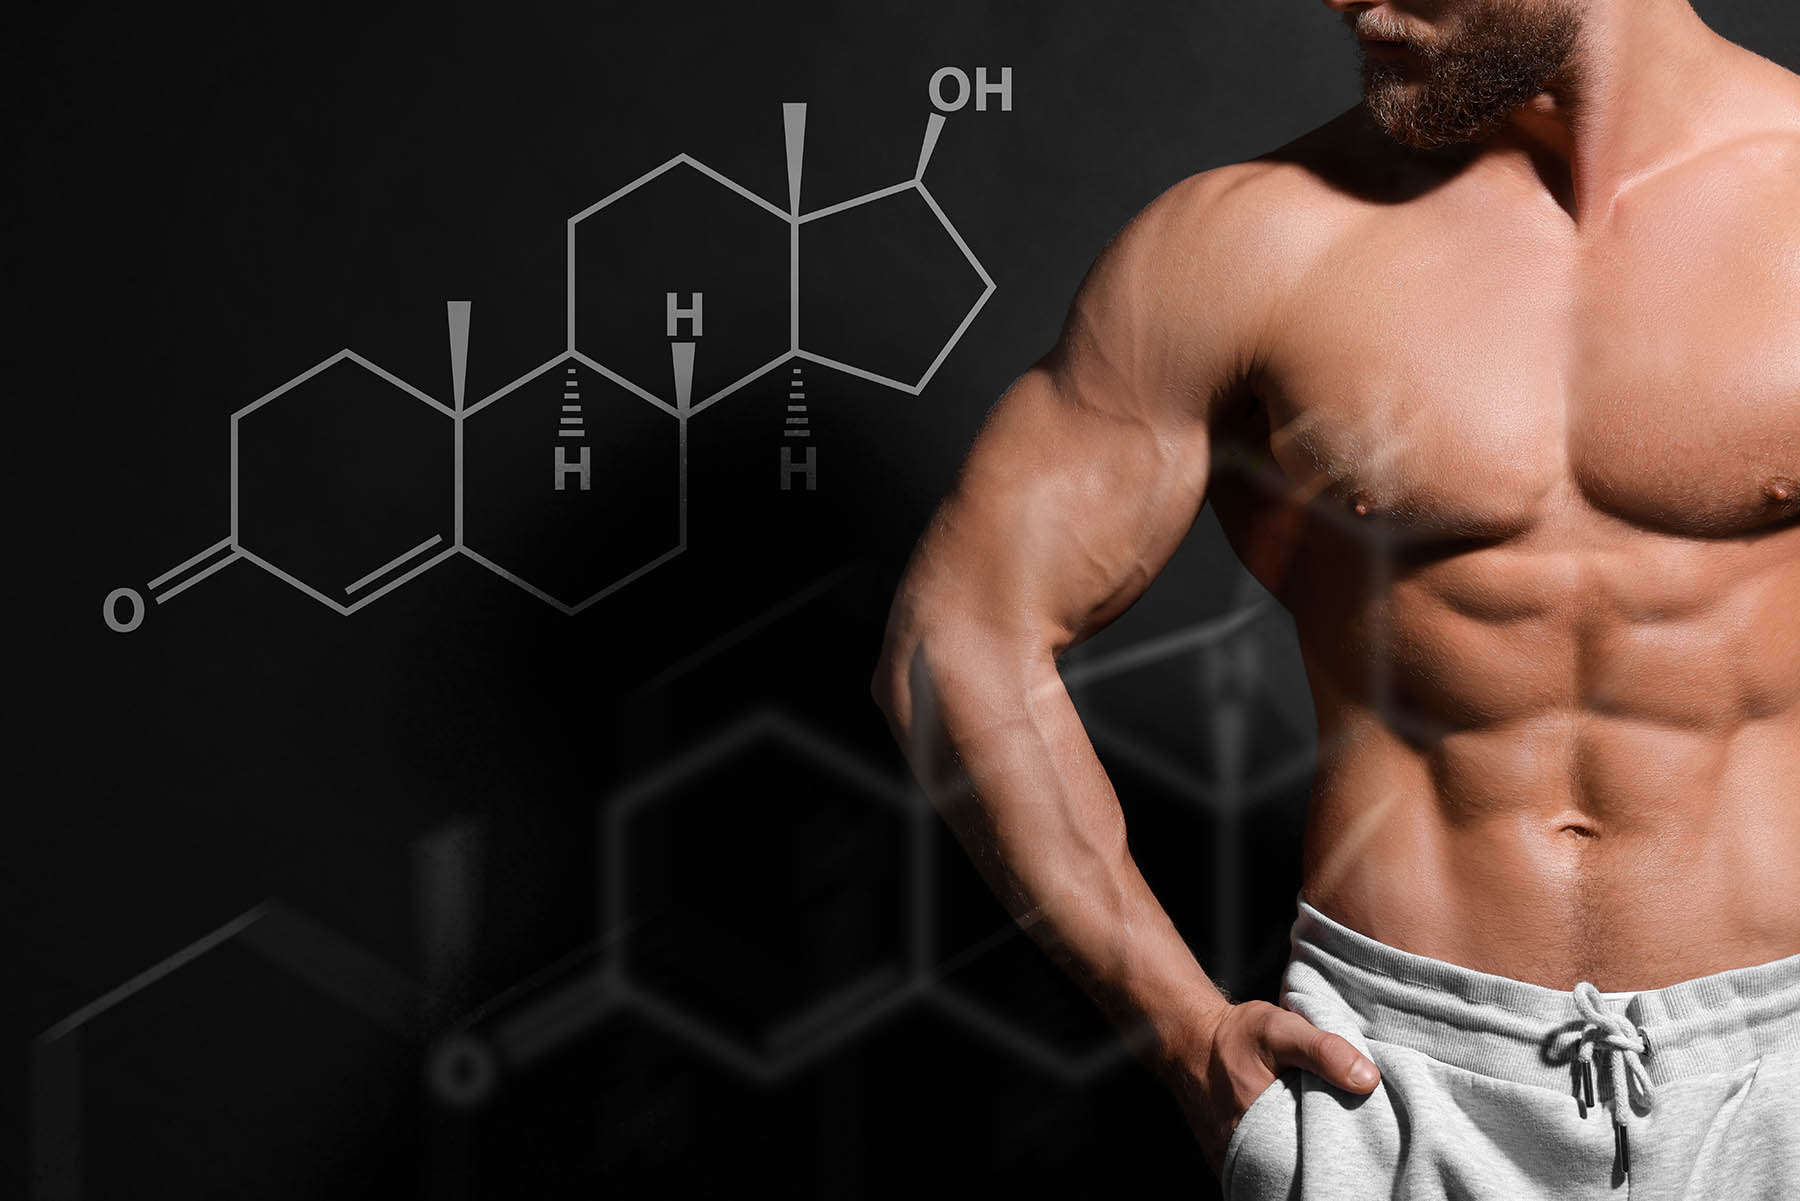 FST-344: Understanding Its Role in Muscle Growth